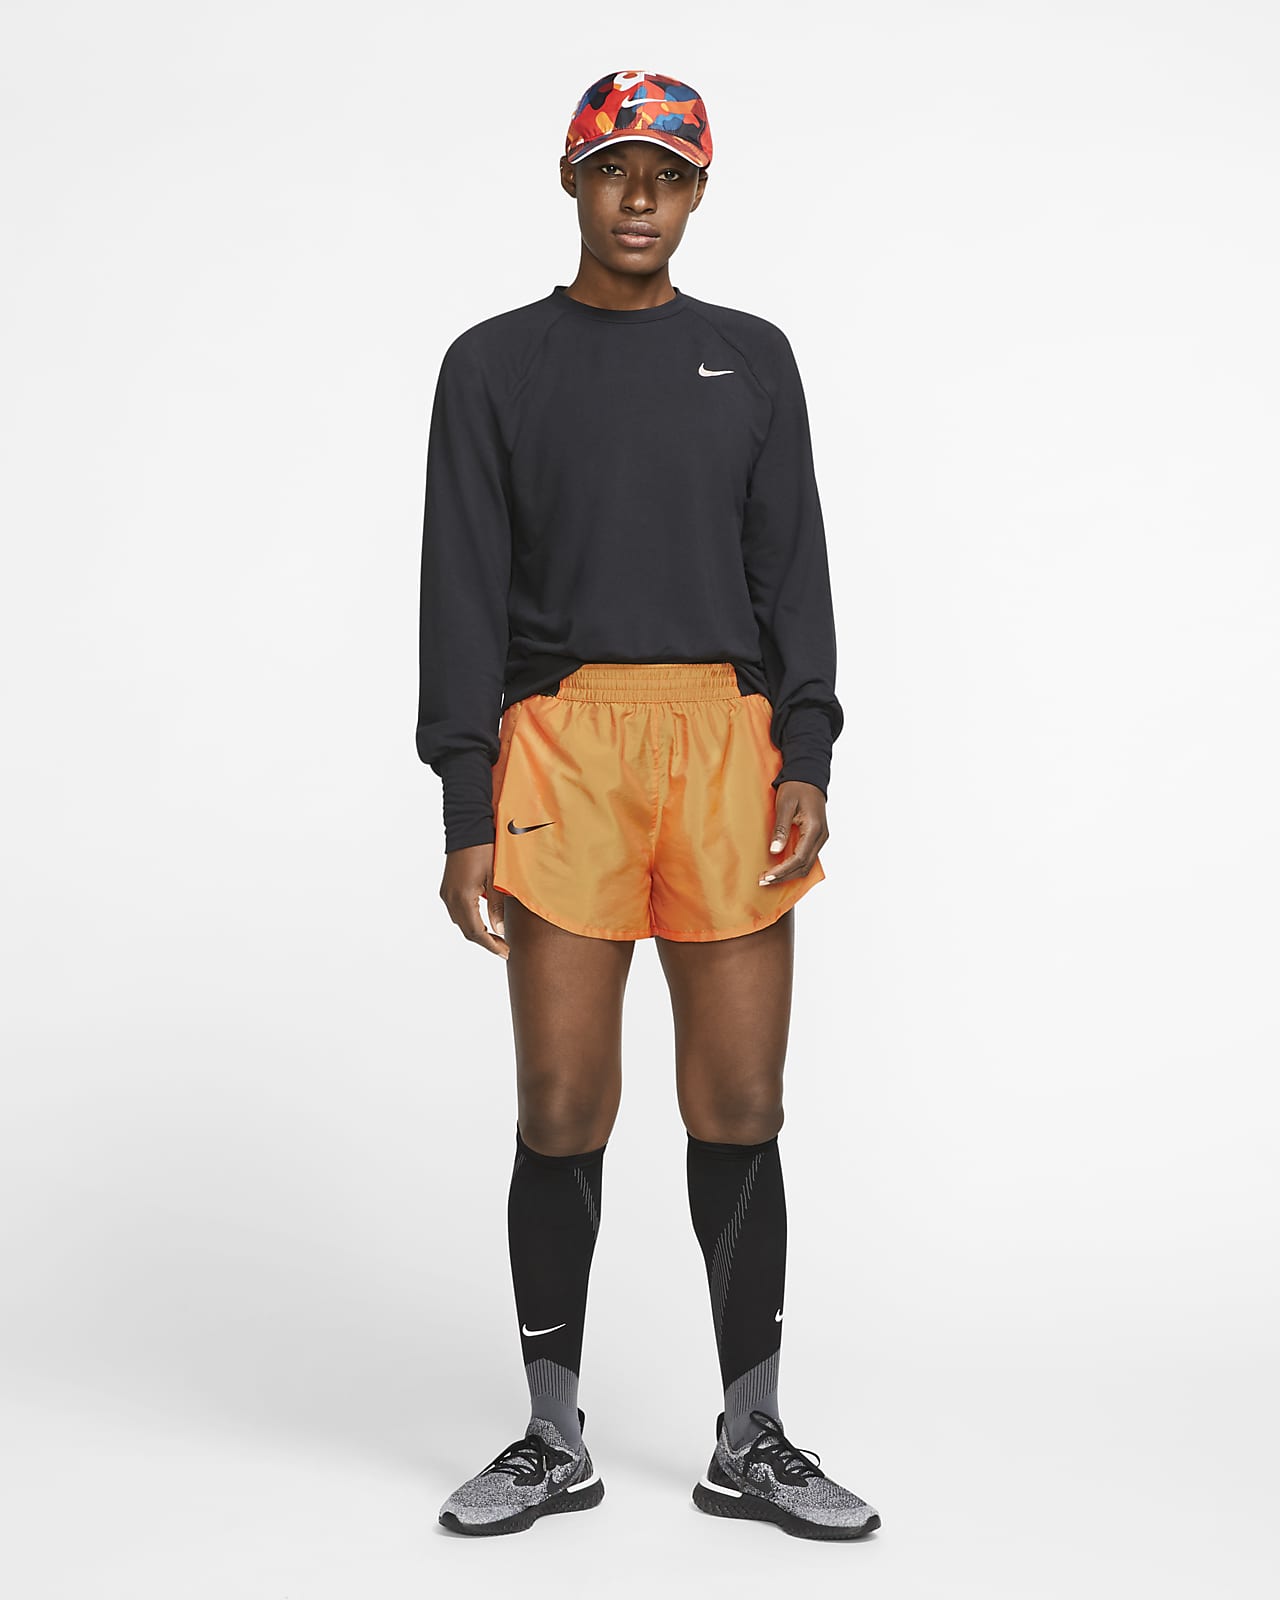 https://static.nike.com/a/images/t_PDP_1280_v1/f_auto,q_auto:eco/ga5zyoxgt8xz2im5xrgn/tempo-luxe-running-shorts-nj76Jv.png